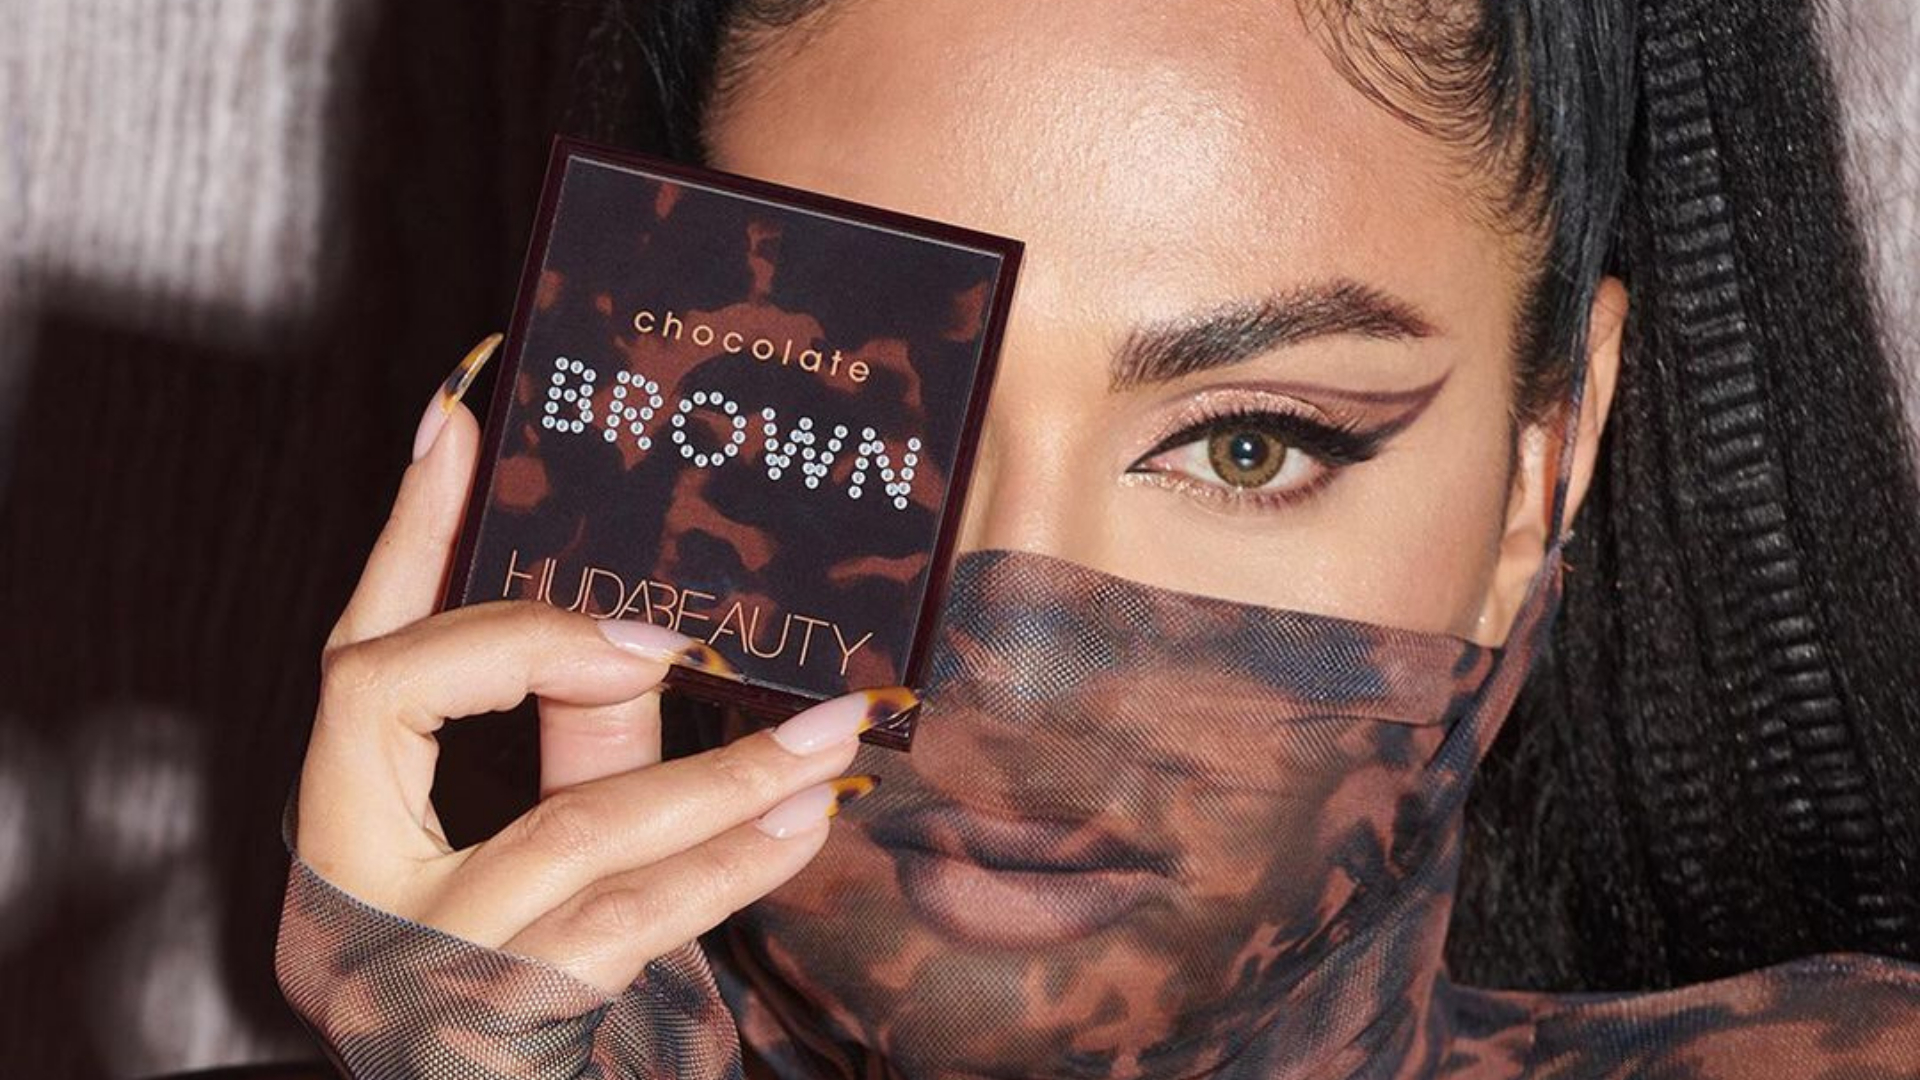 Huda Beauty's new brown obsessions palettes are going to become